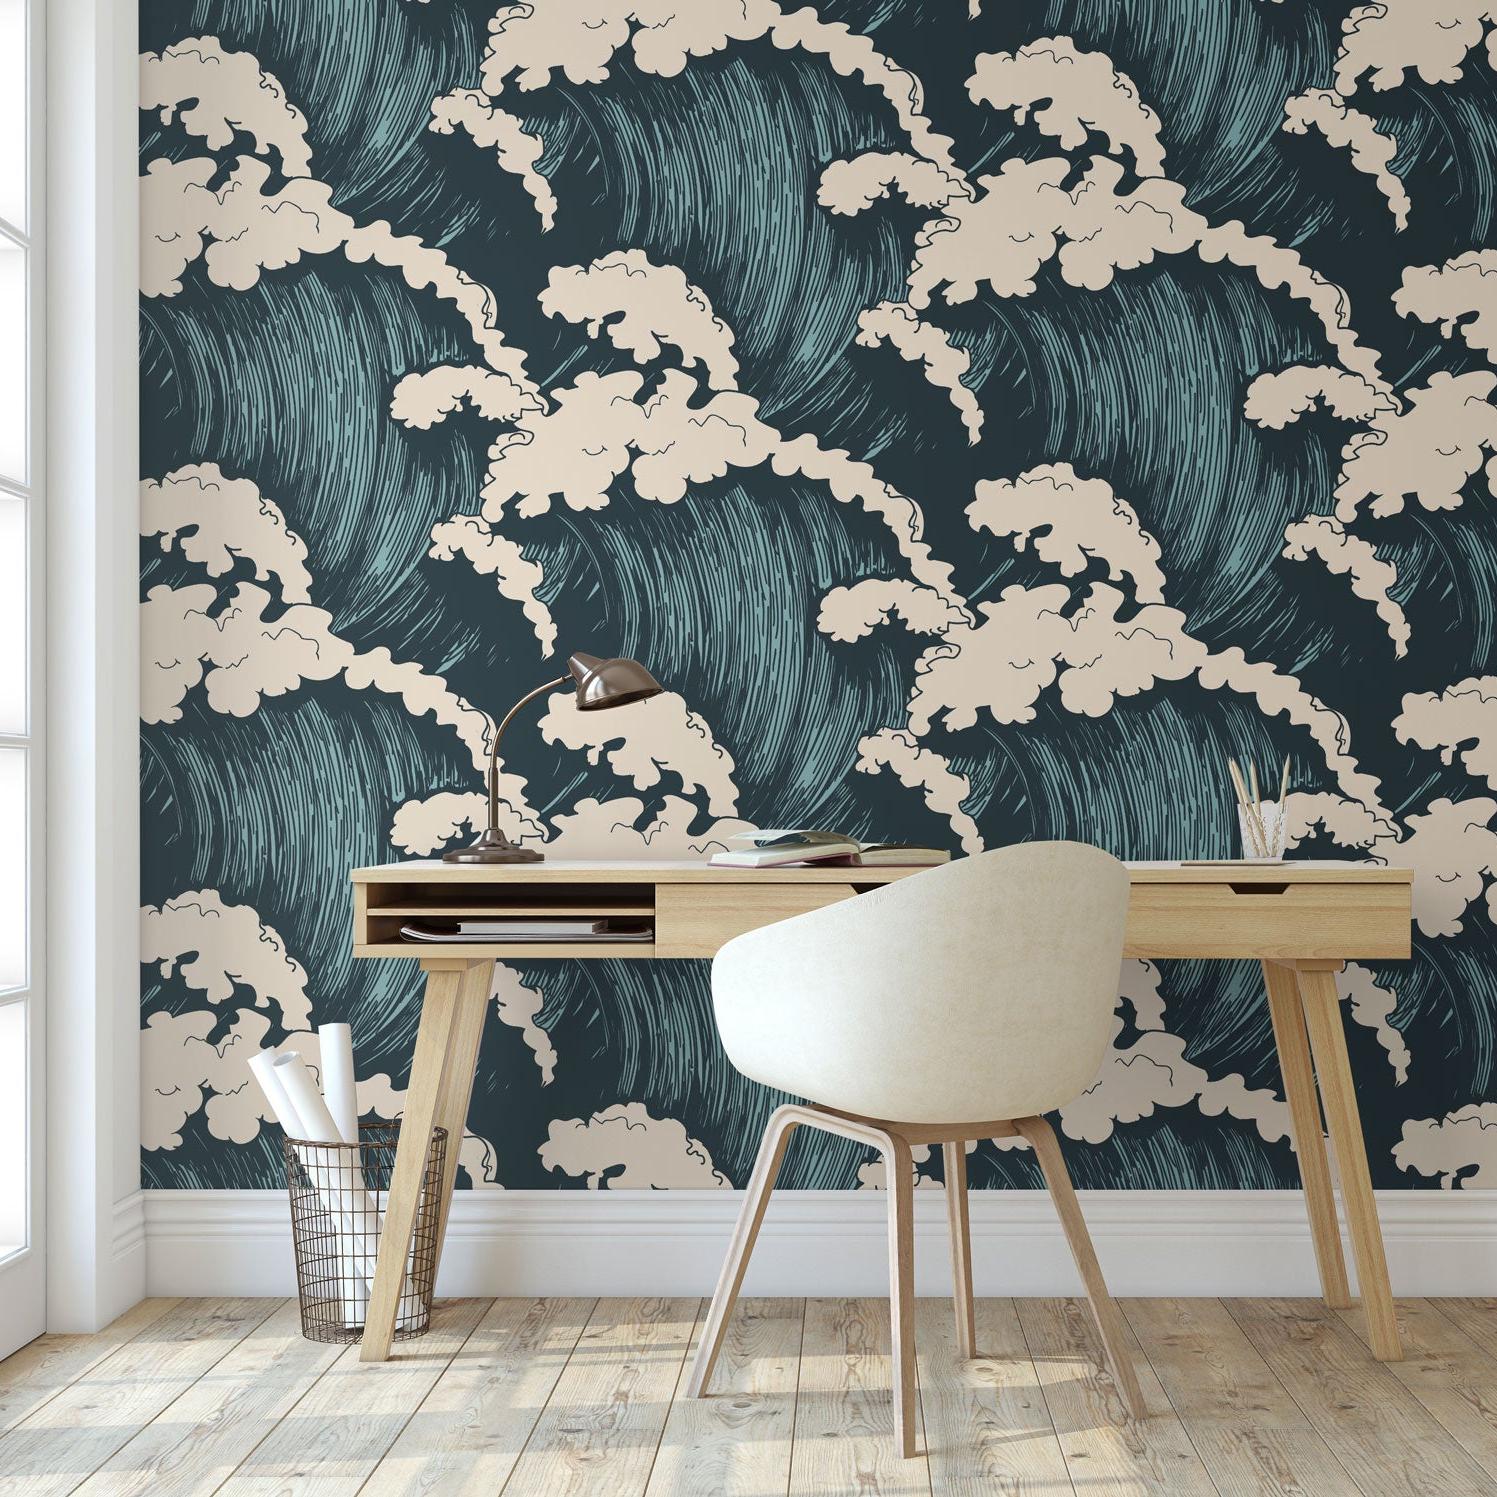 Maverick Wallpaper by Wall Blush SG02 in a stylish home office with focus on wall decor.
